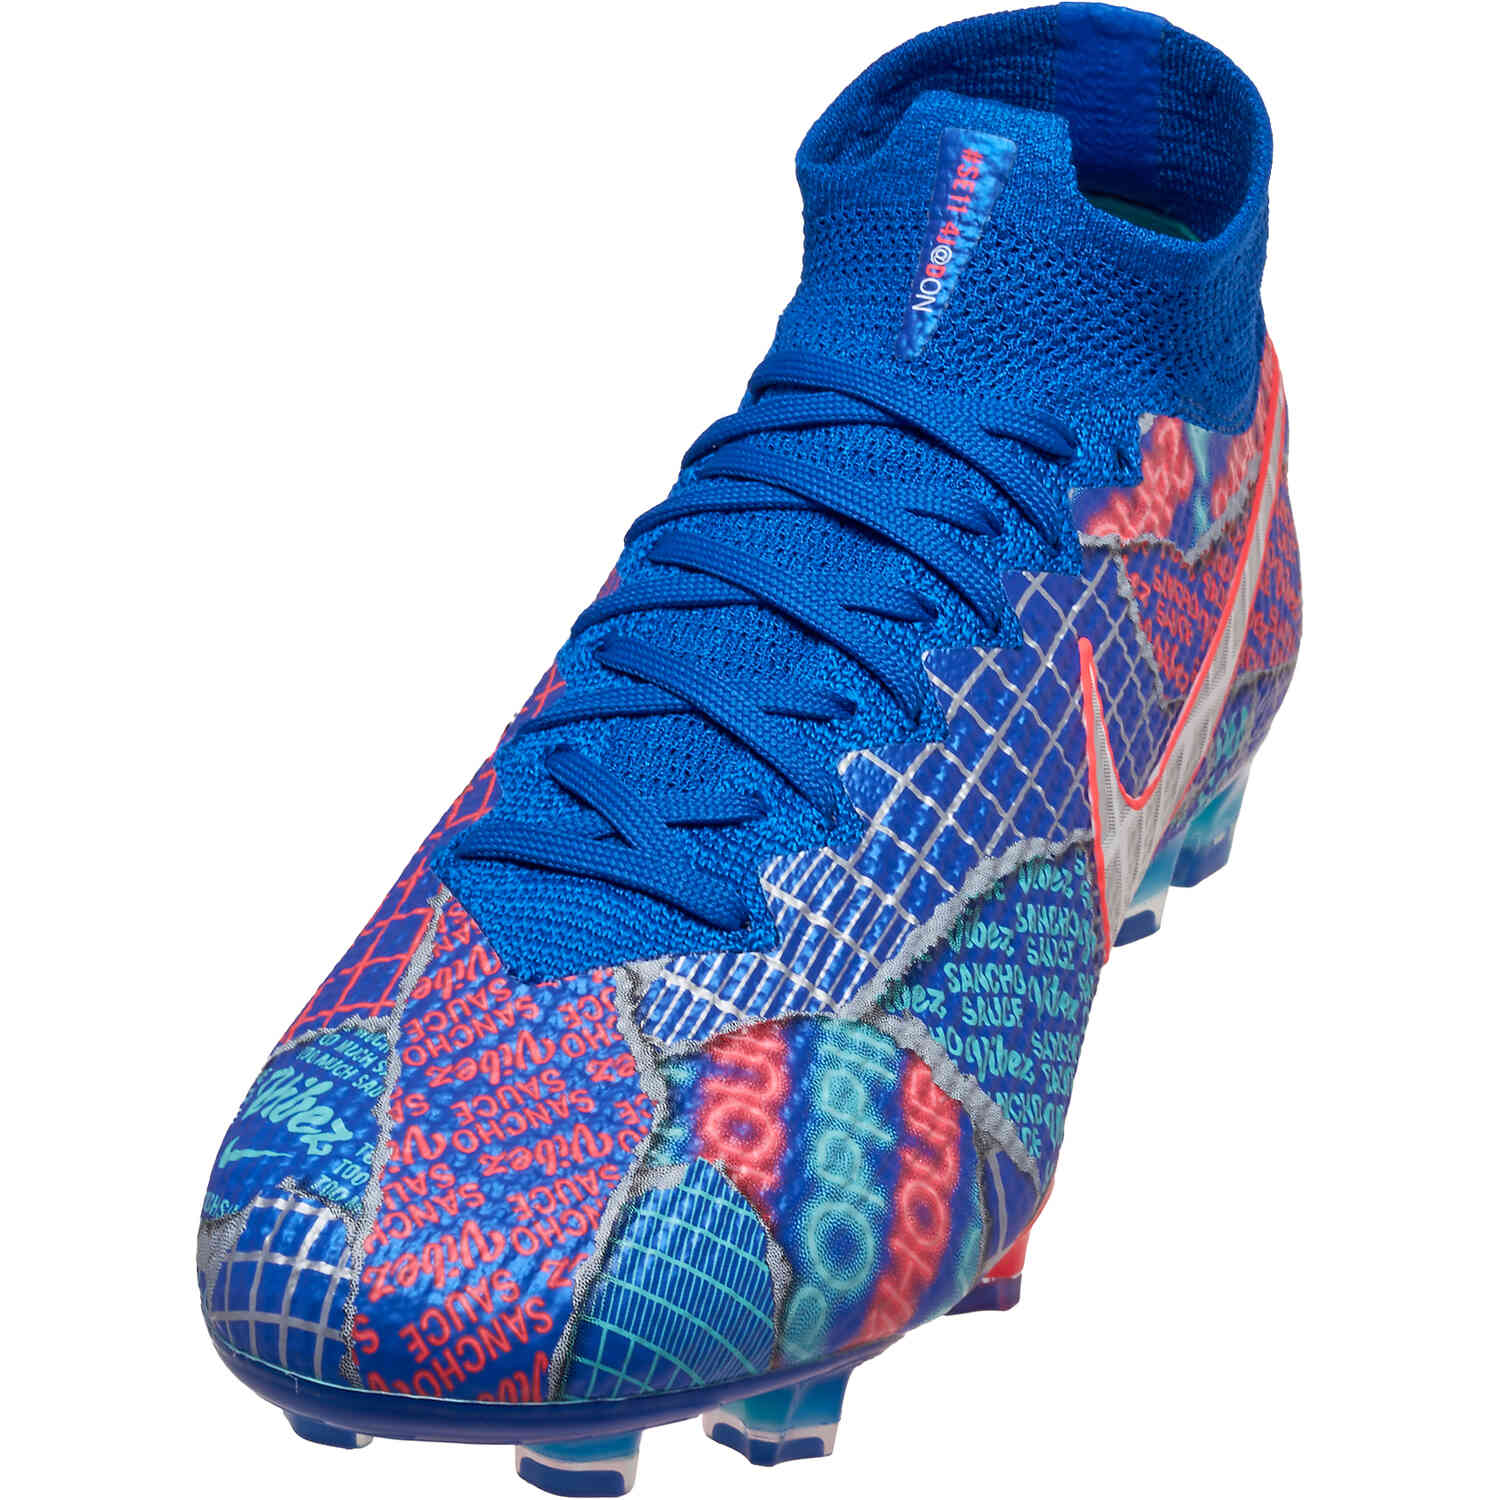 nike mercurial superfly 7 elite se11 sancho firm ground soccer cleat